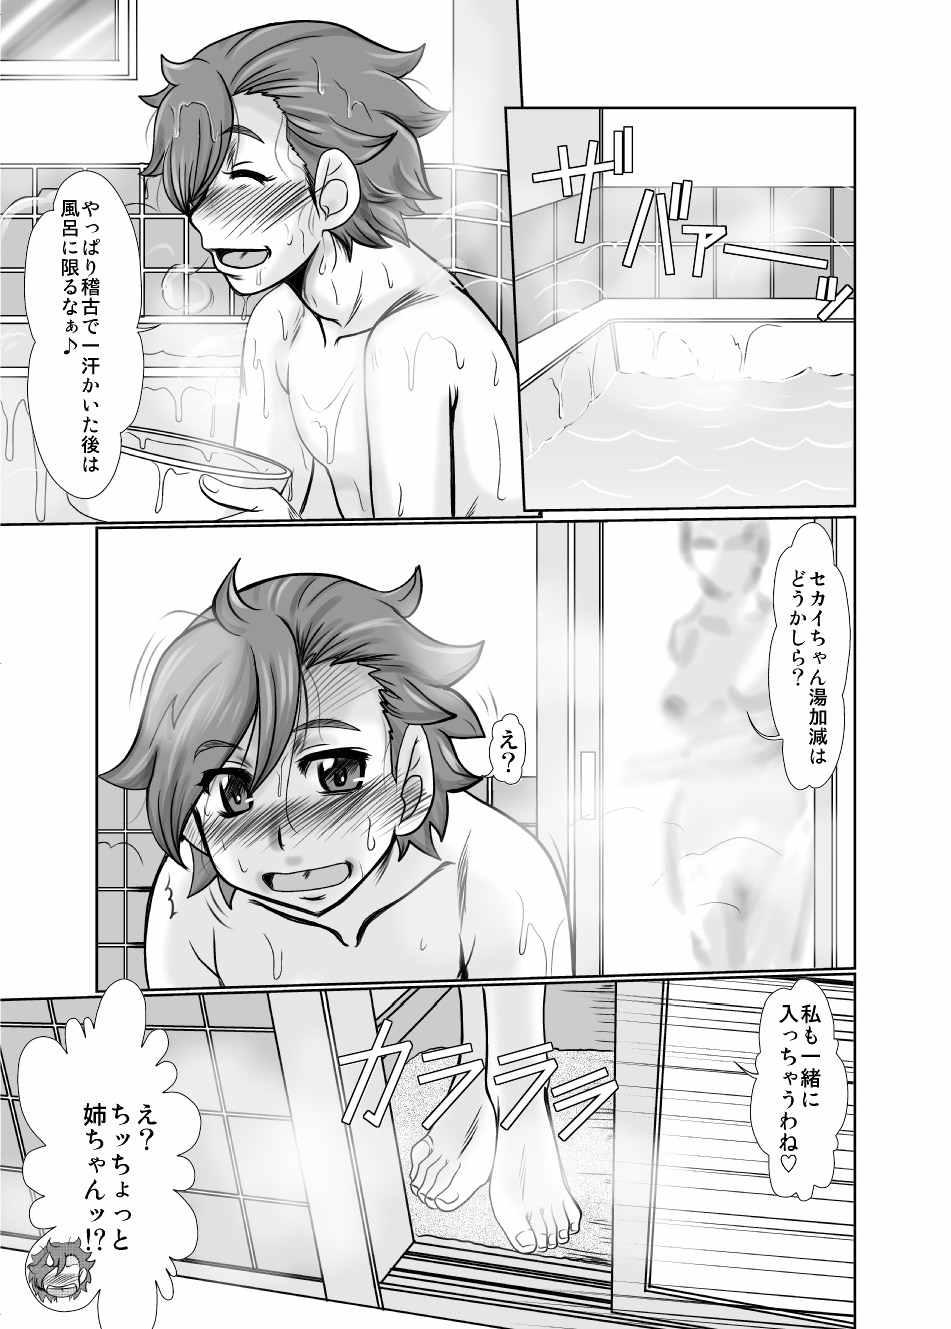 Foursome F-83 - Gundam build fighters try Camwhore - Page 9